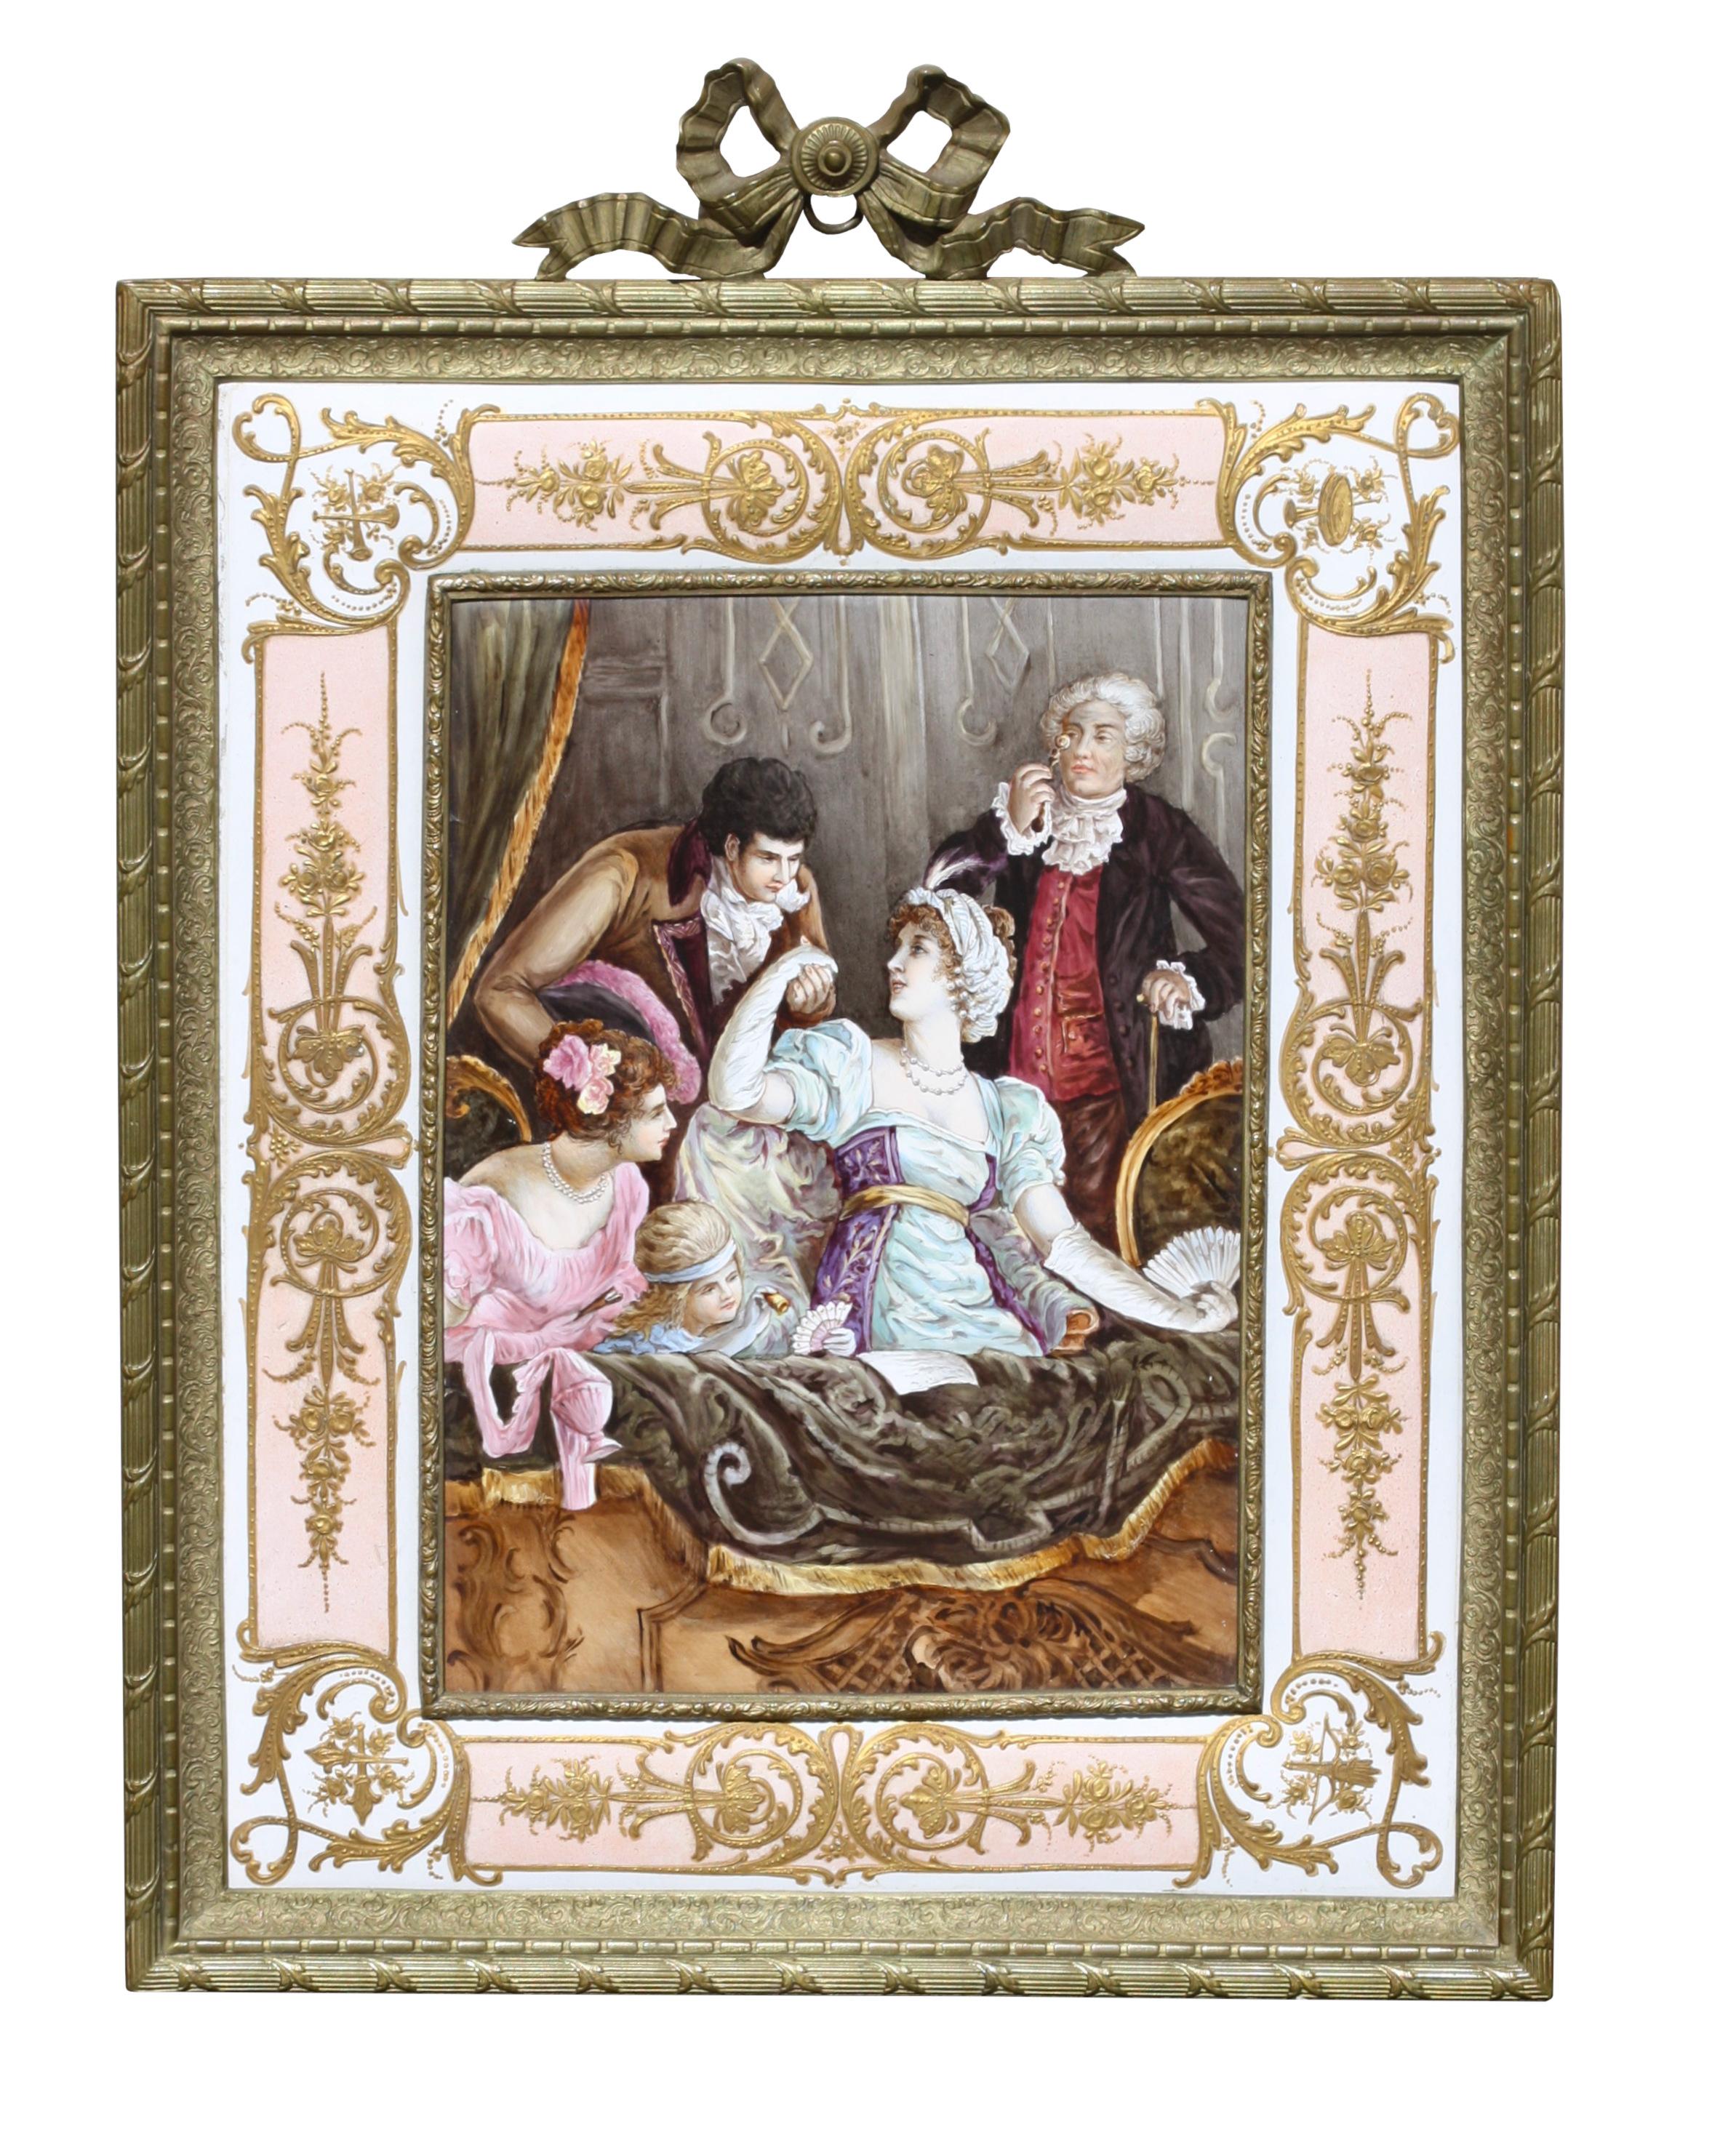 A very fine French parcel-gilt enamel plaque within ormolu frame
Late 19th-early 20th century
The rectangular plaque depicting a family seated at a theatre balcony, within a pink and white-ground surround decorated with scrolling branches and